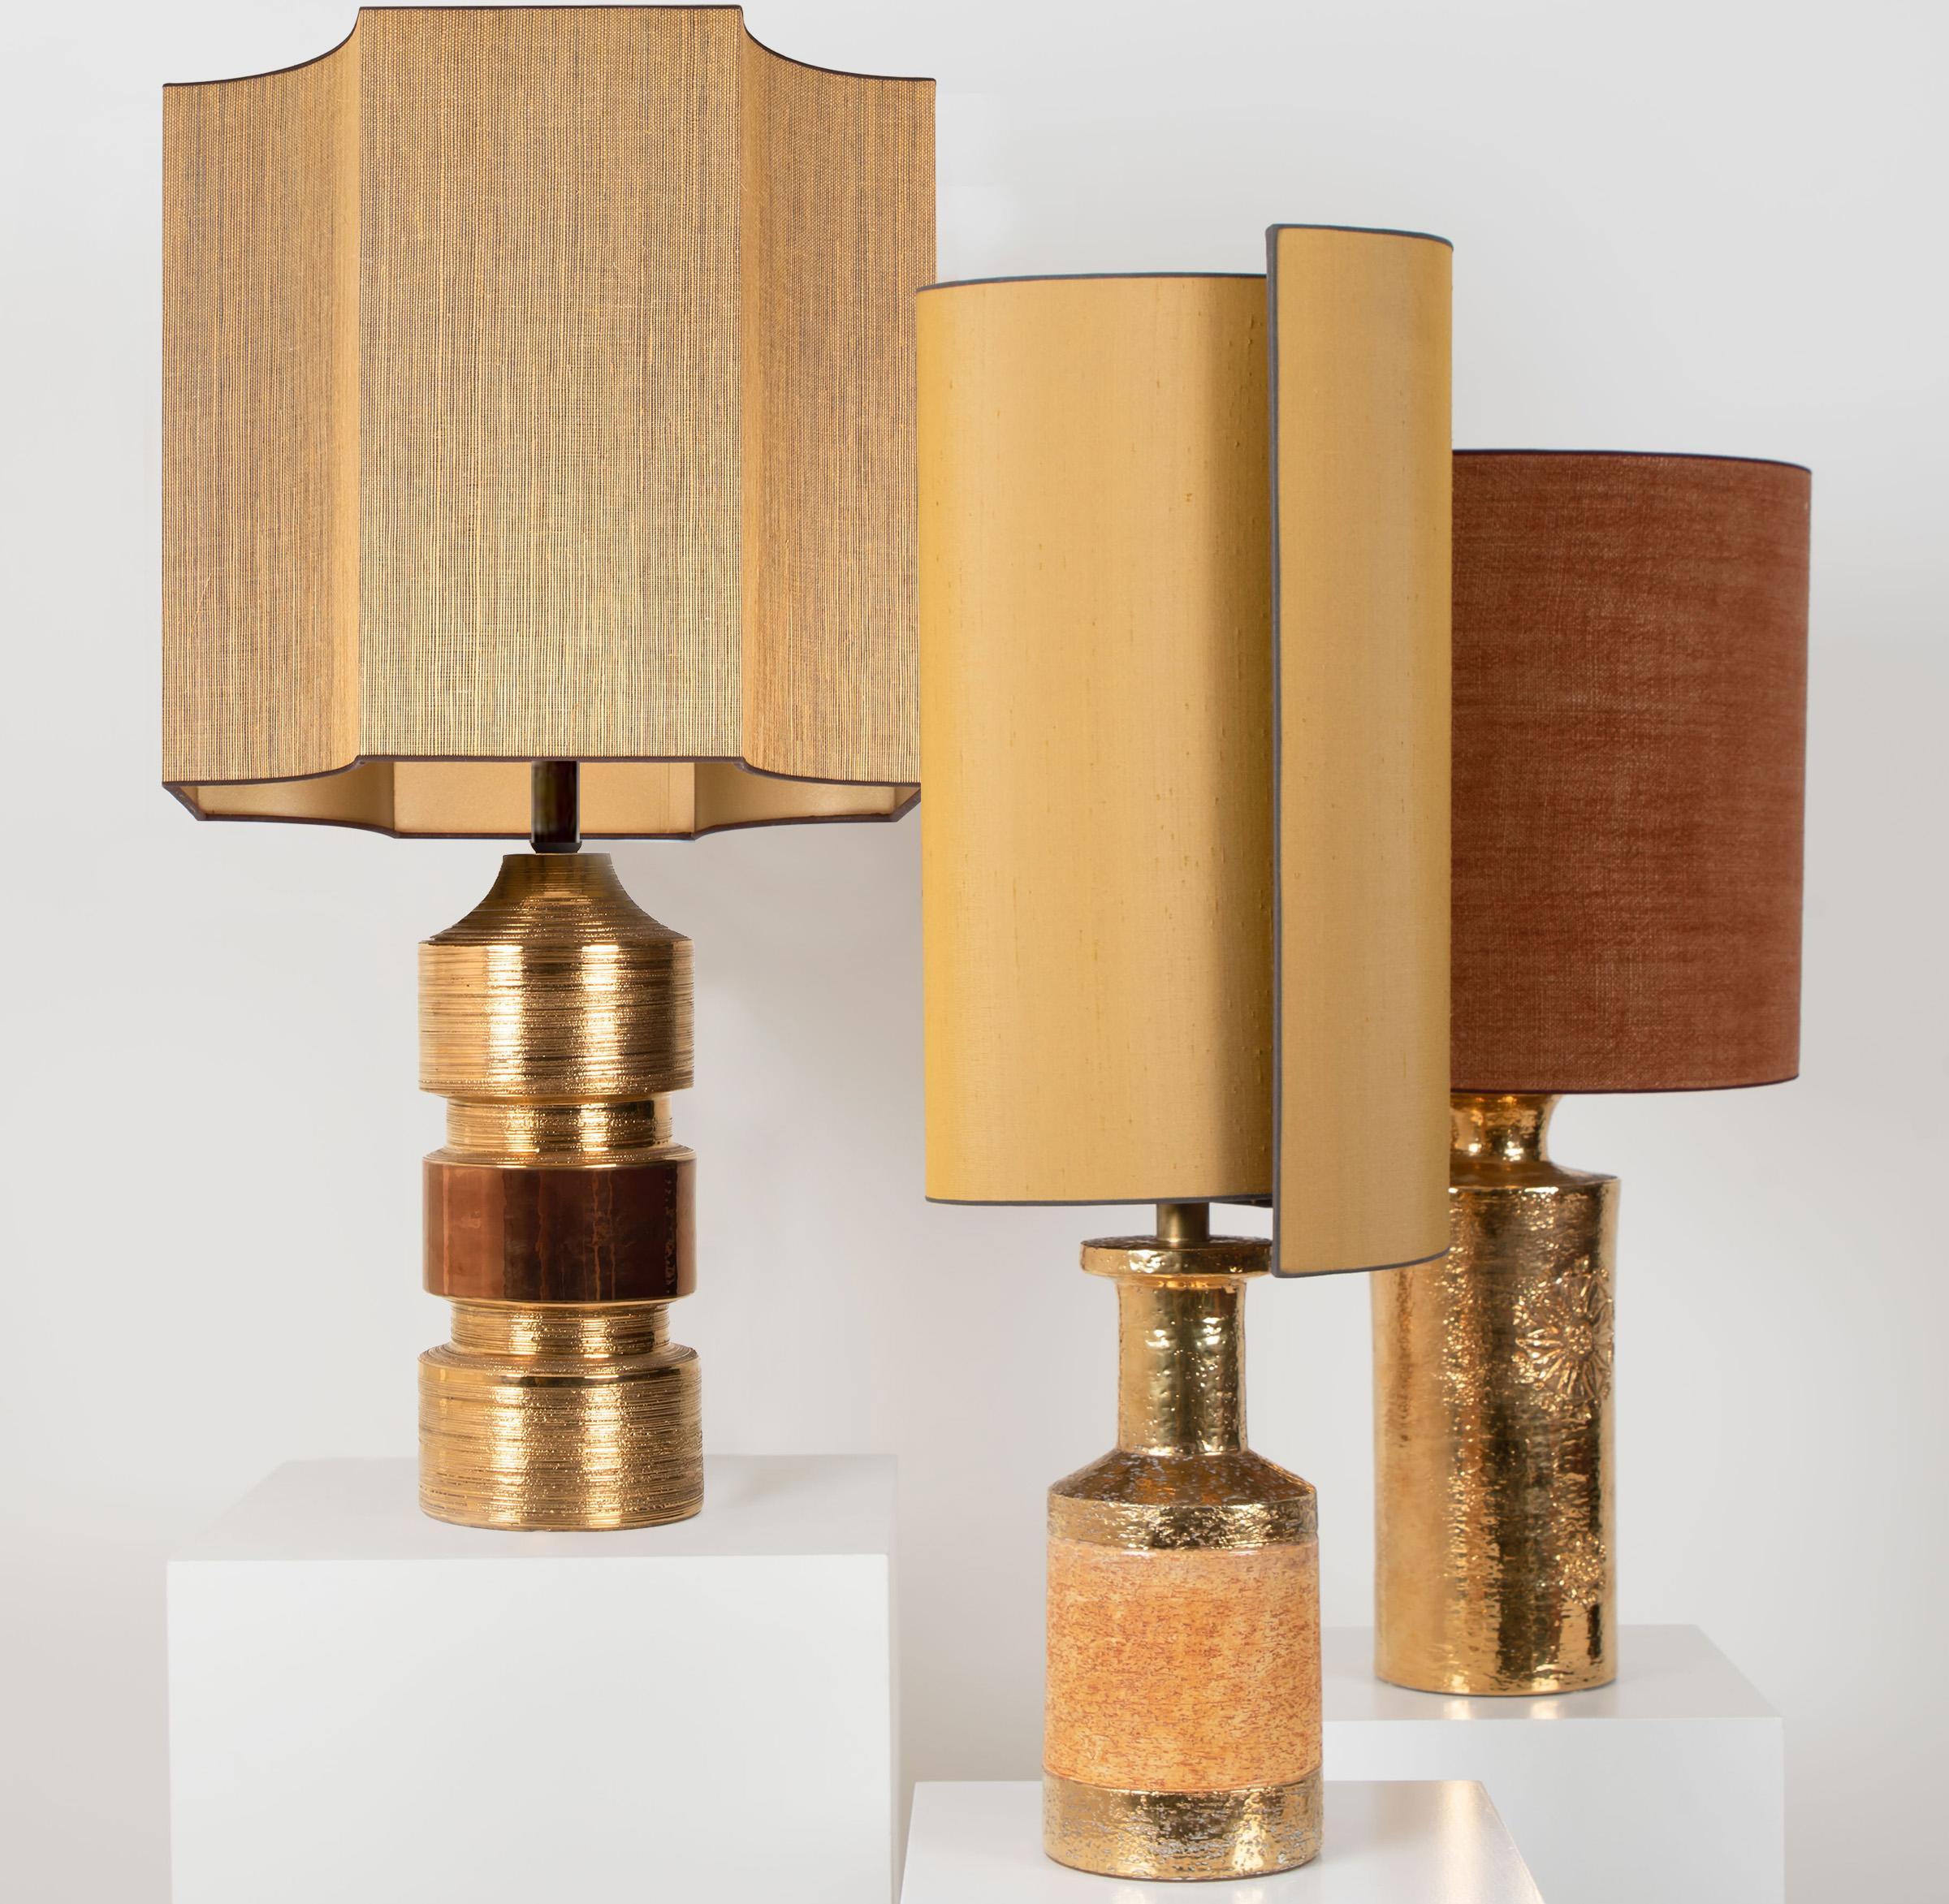 Pair of Bitossi Lamps for Bergboms, with Custom Made Shades by Rene Houben For Sale 5